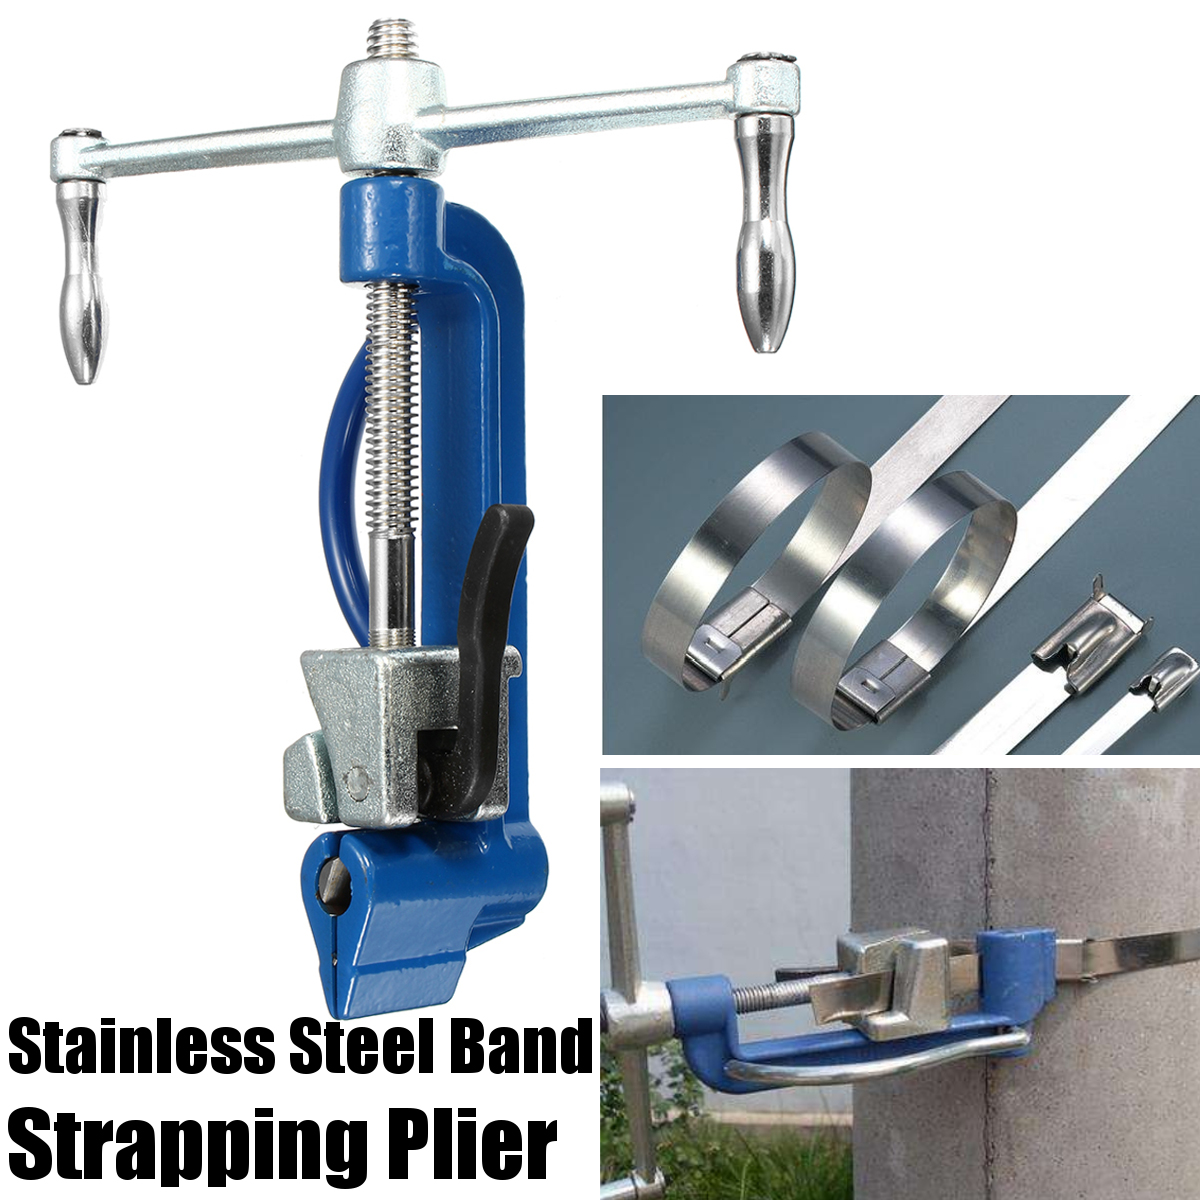 Band-Strapping-Pliers-Tool-Strapper-WrapperPacker-Manual-BindingWrapping-Metal-Tie-Cutting-Tool-1338670-2